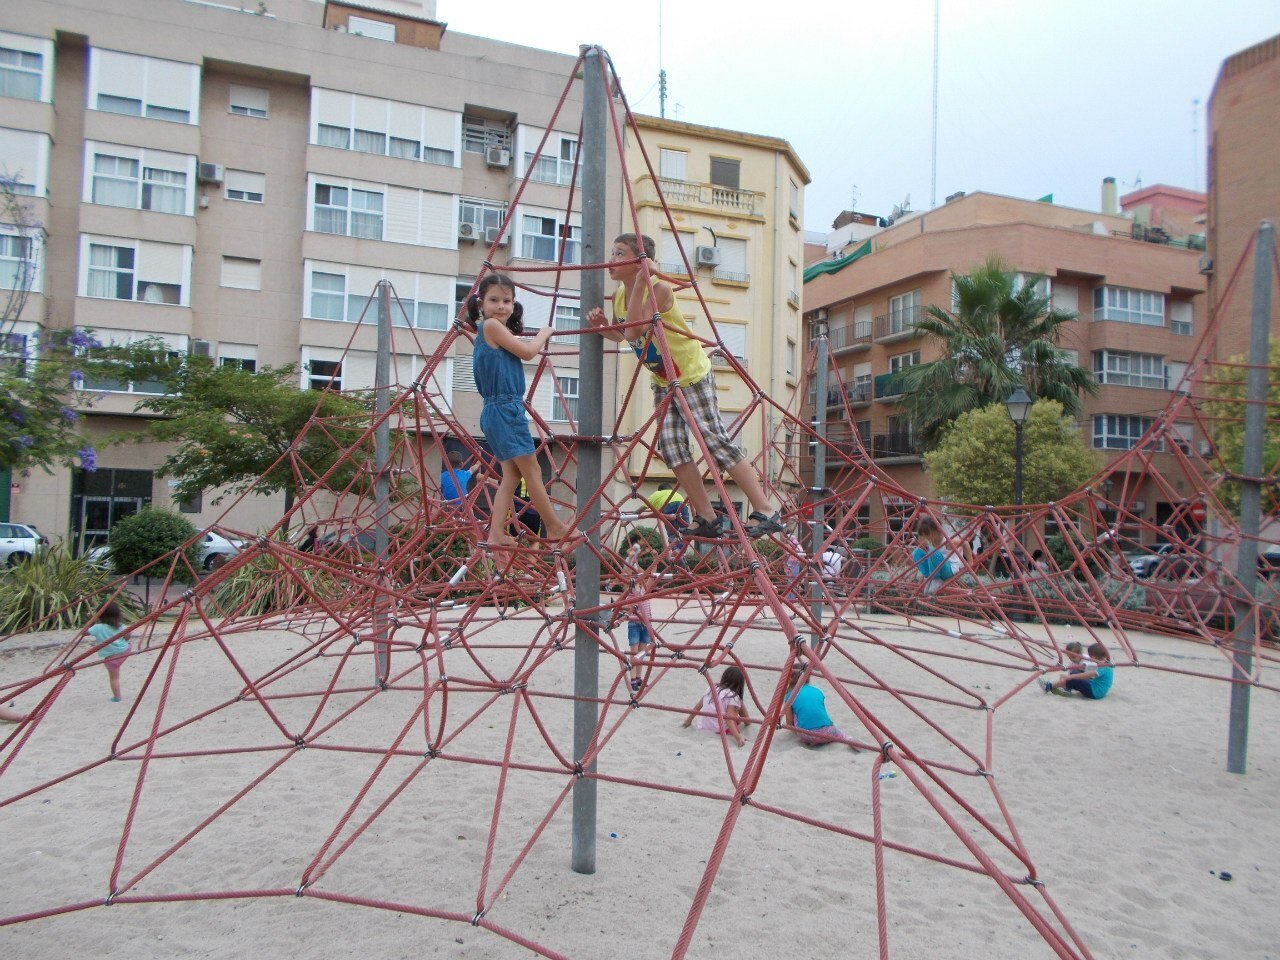 A playground with sand and nets in an ordinary yard